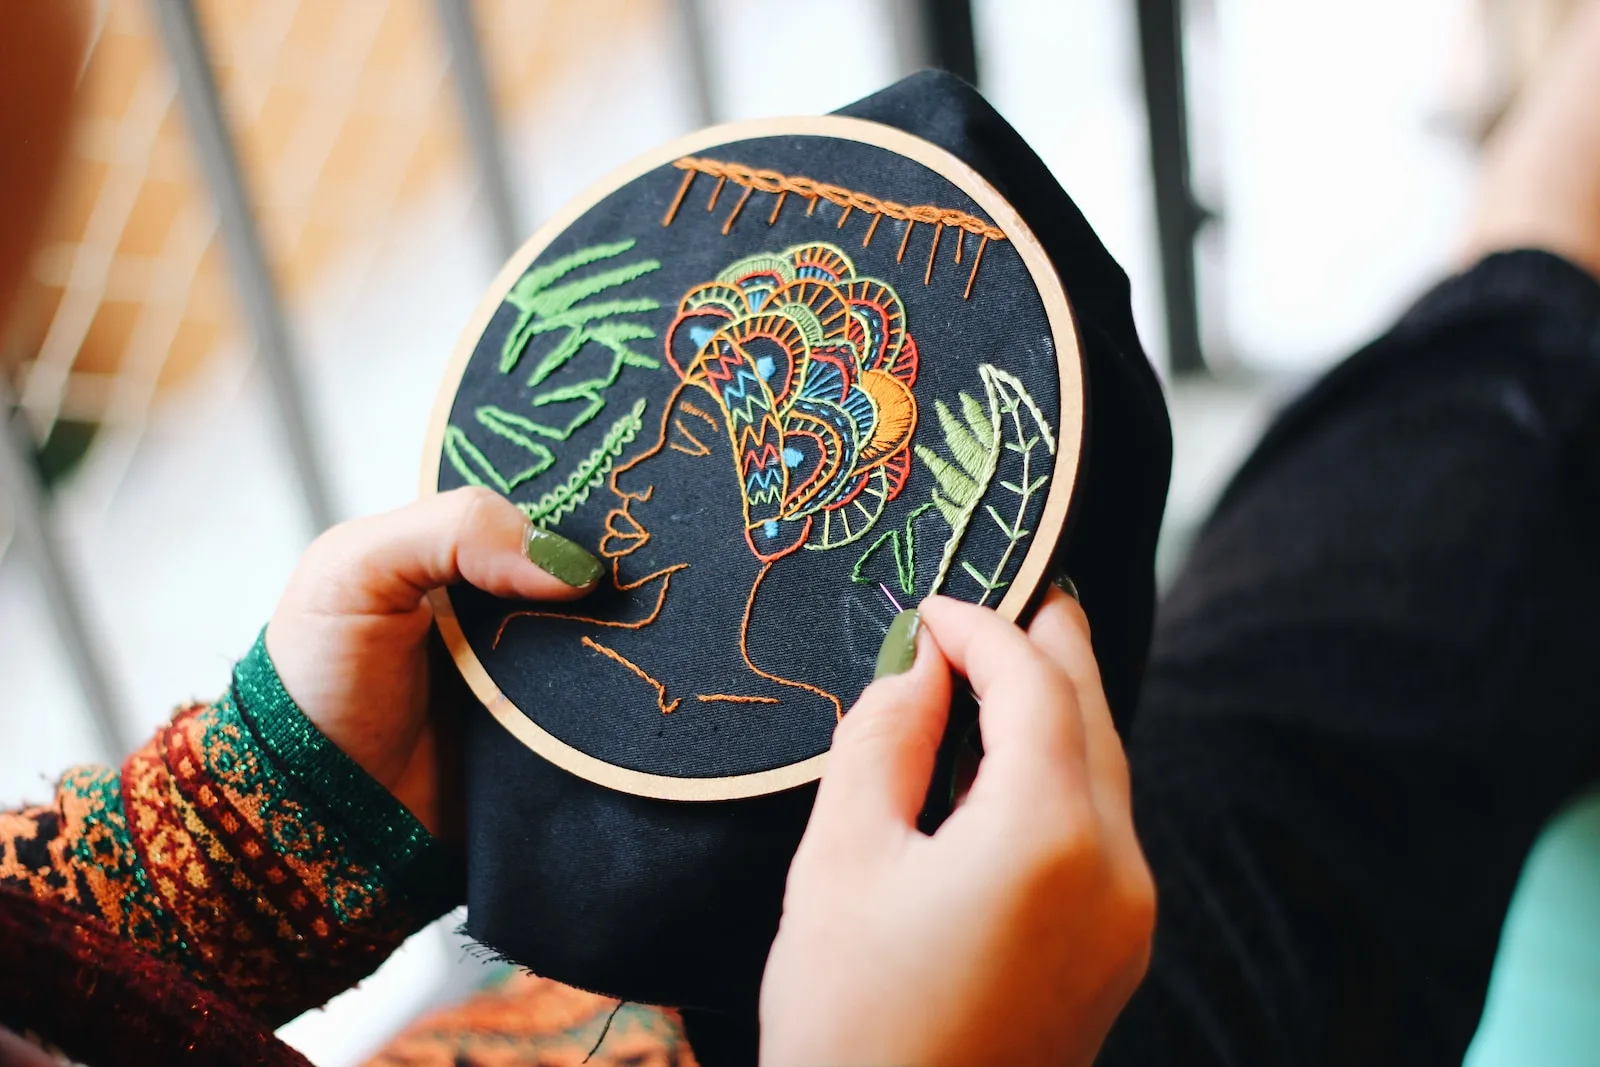 Embroidery vs. Cross-Stitch: Which is Faster to Complete?